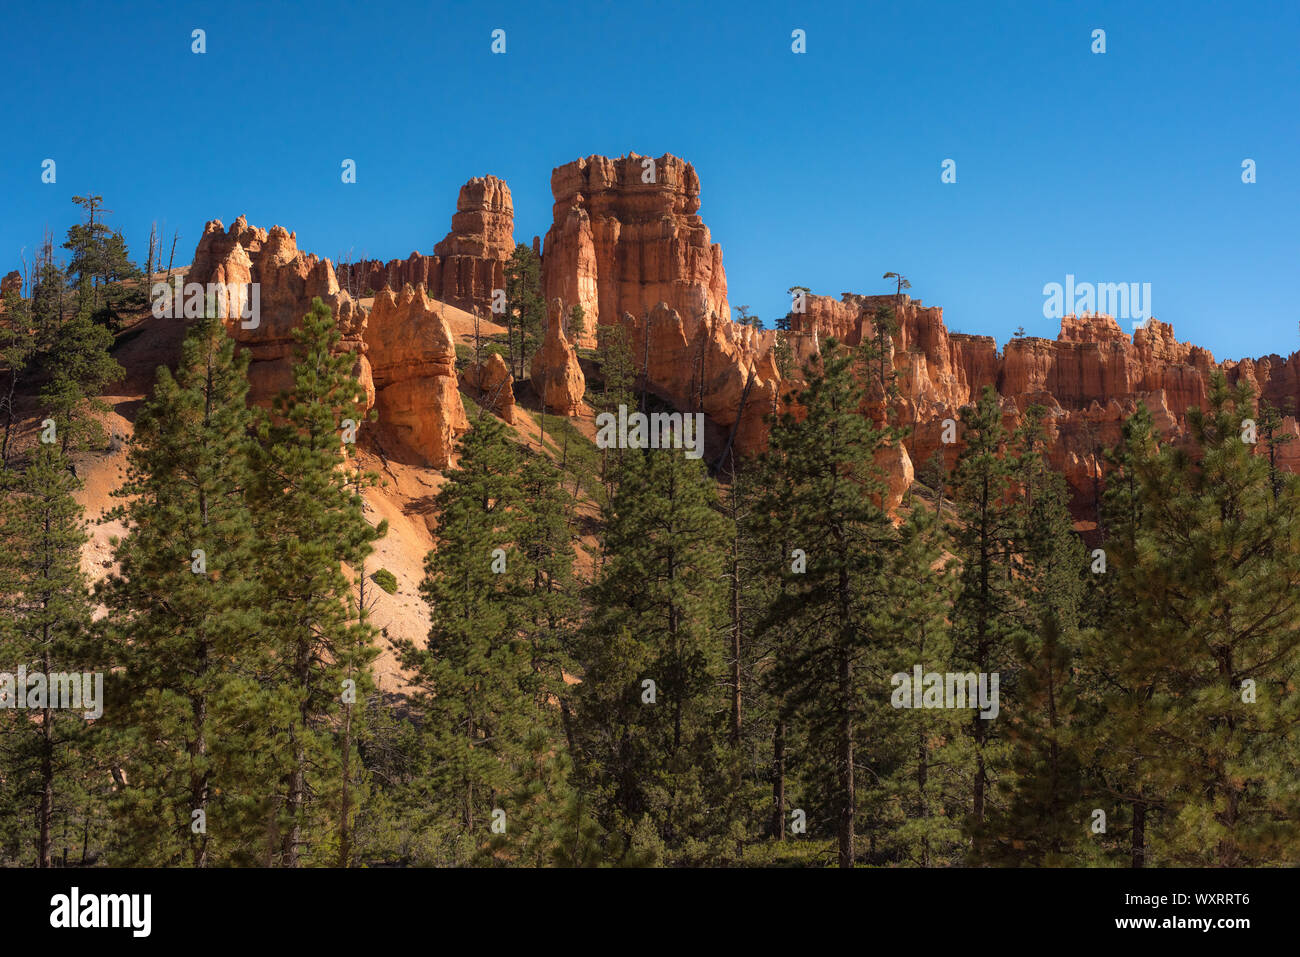 Pine tree grows among the Rock Formations which form the colorful background at Bryce Canyon National Park Stock Photo